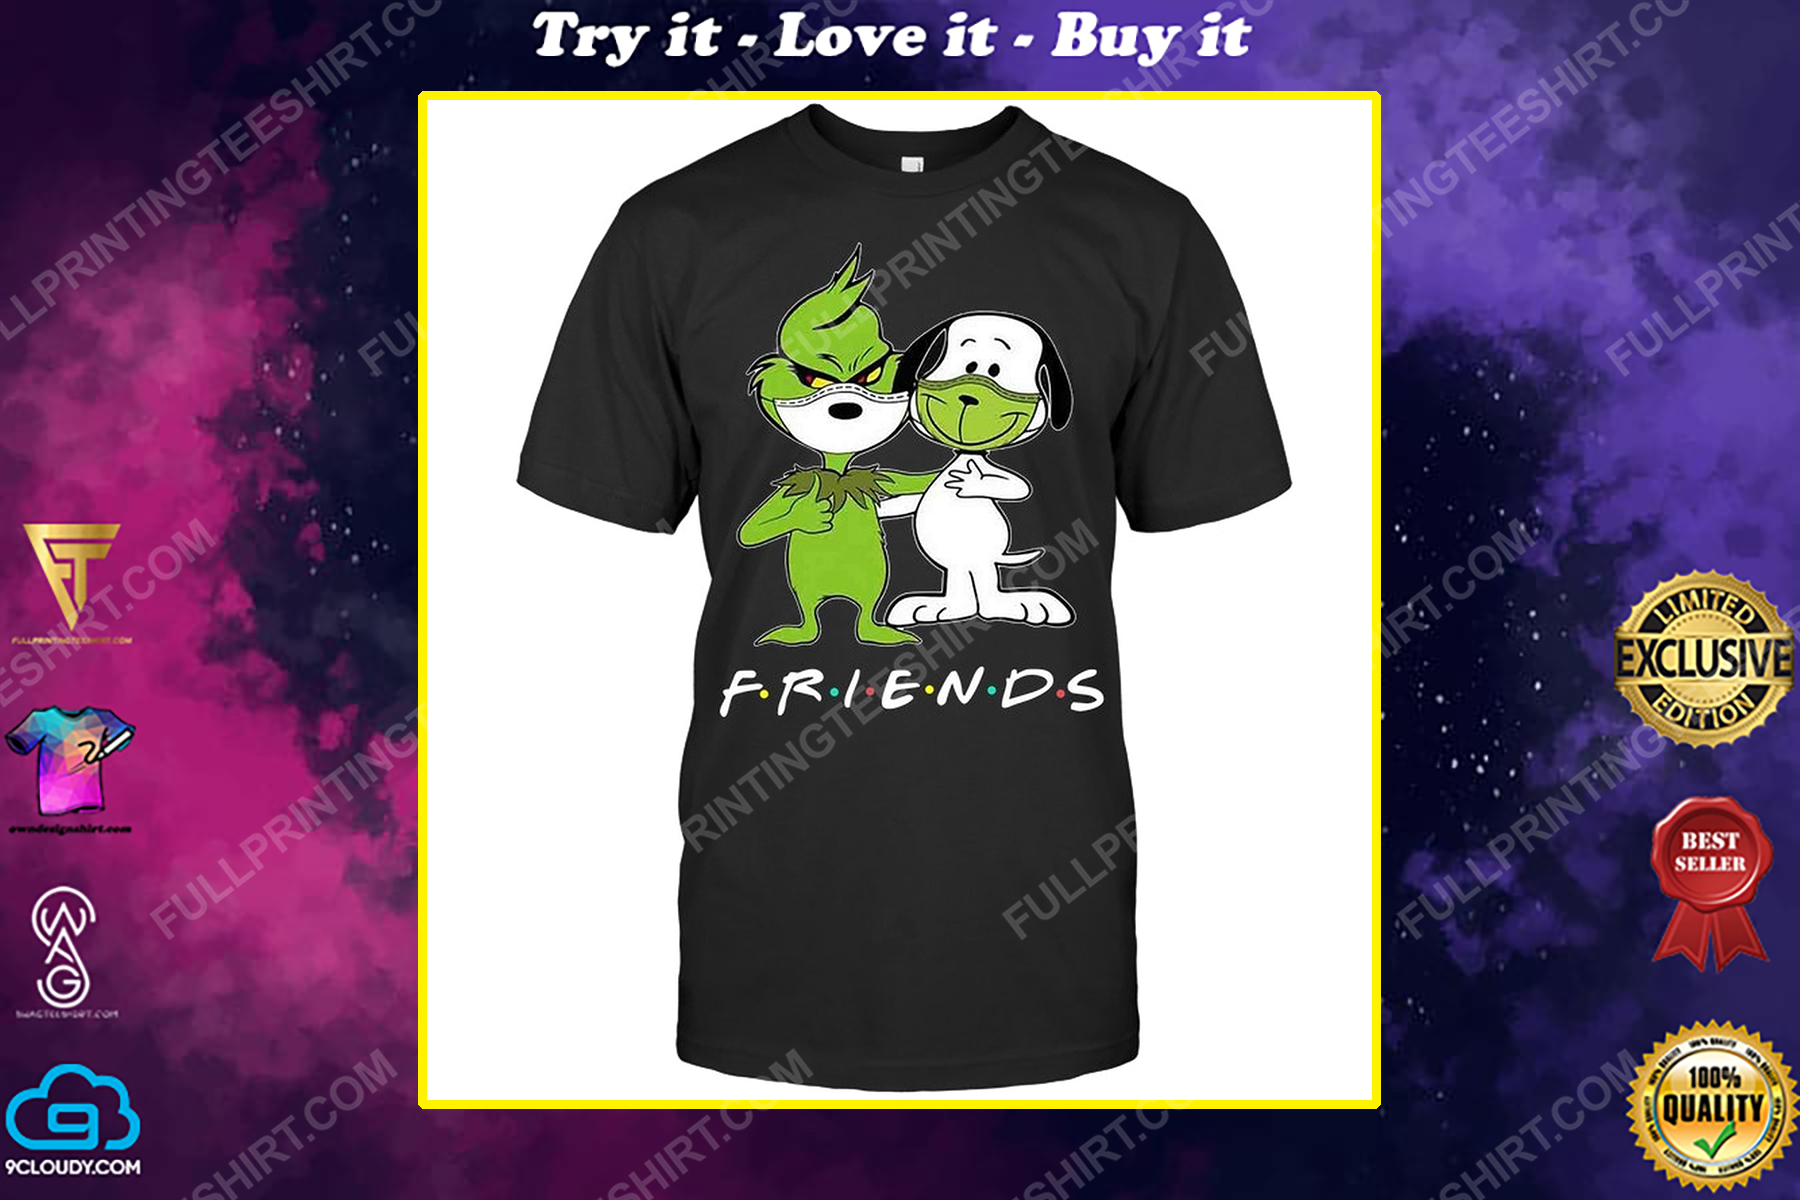 The grinch and snoopy friends tv show shirt